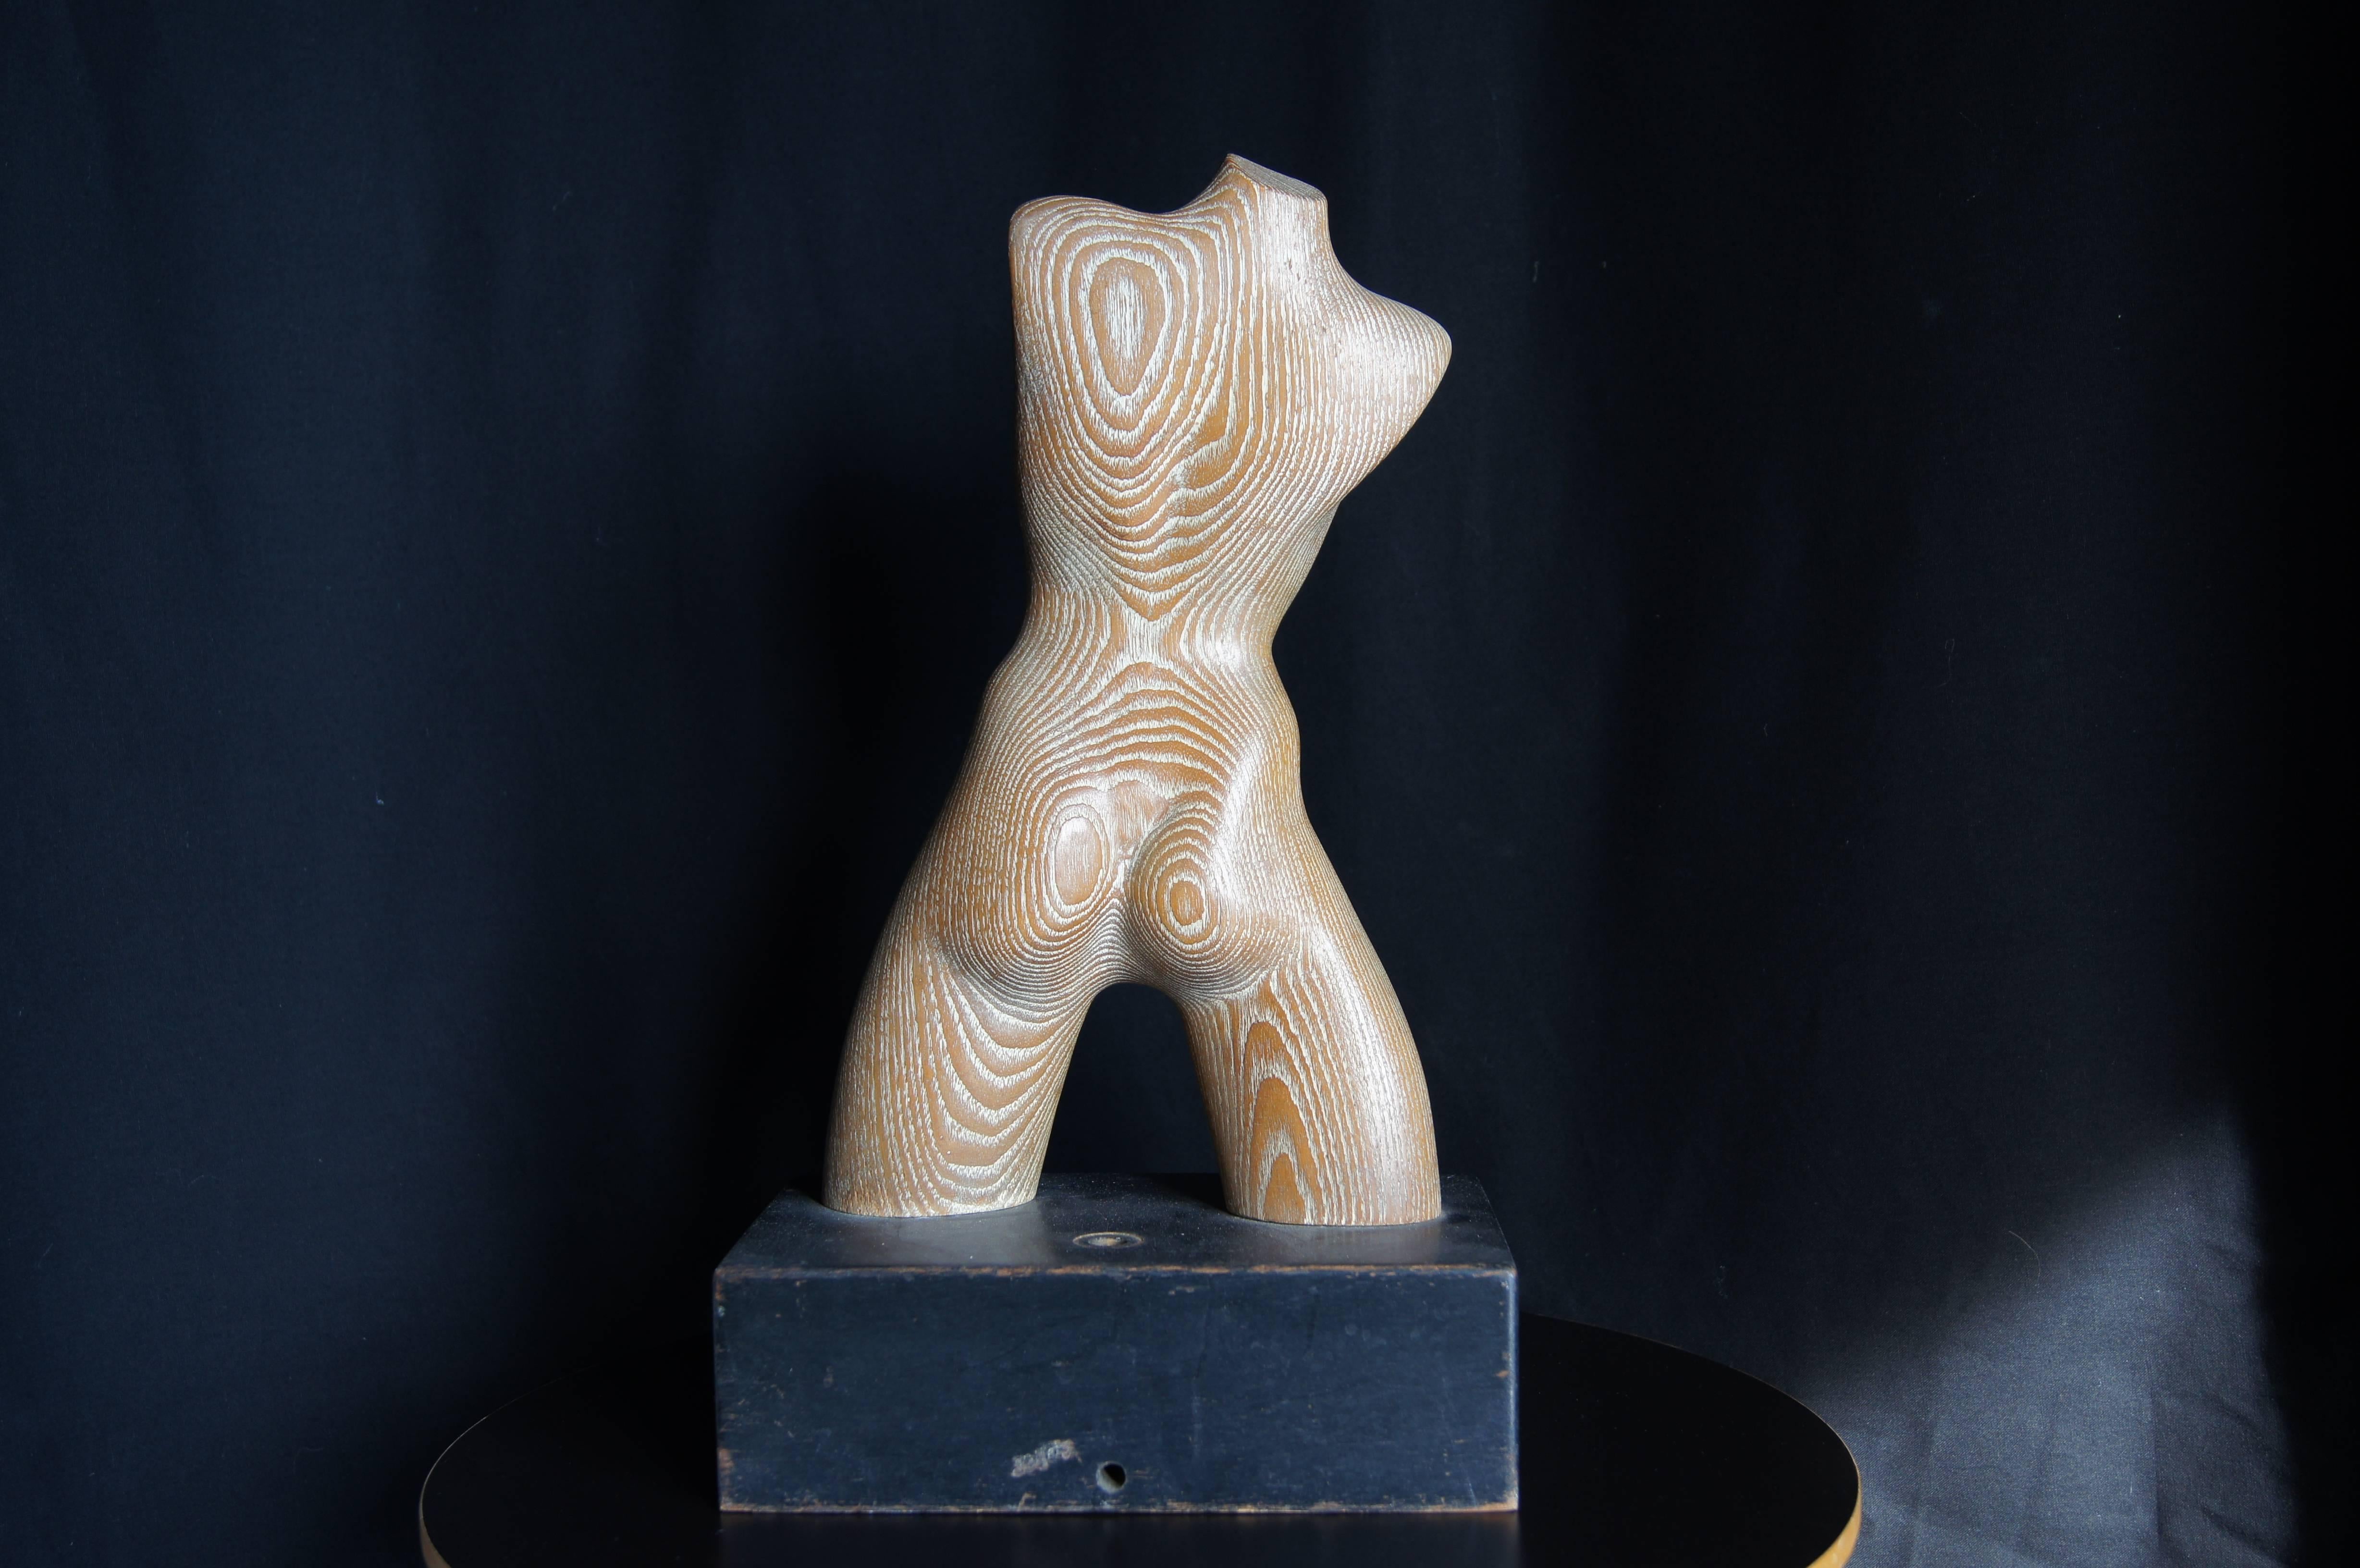 Yasha Heifetz carved this figure of a female torso from coursed oak, using the grain of the wood expressively.

The Heifetz Manufacturing Company was founded in 1938 and by the fifties was well known for its lamps. This sculpture sits on a base with